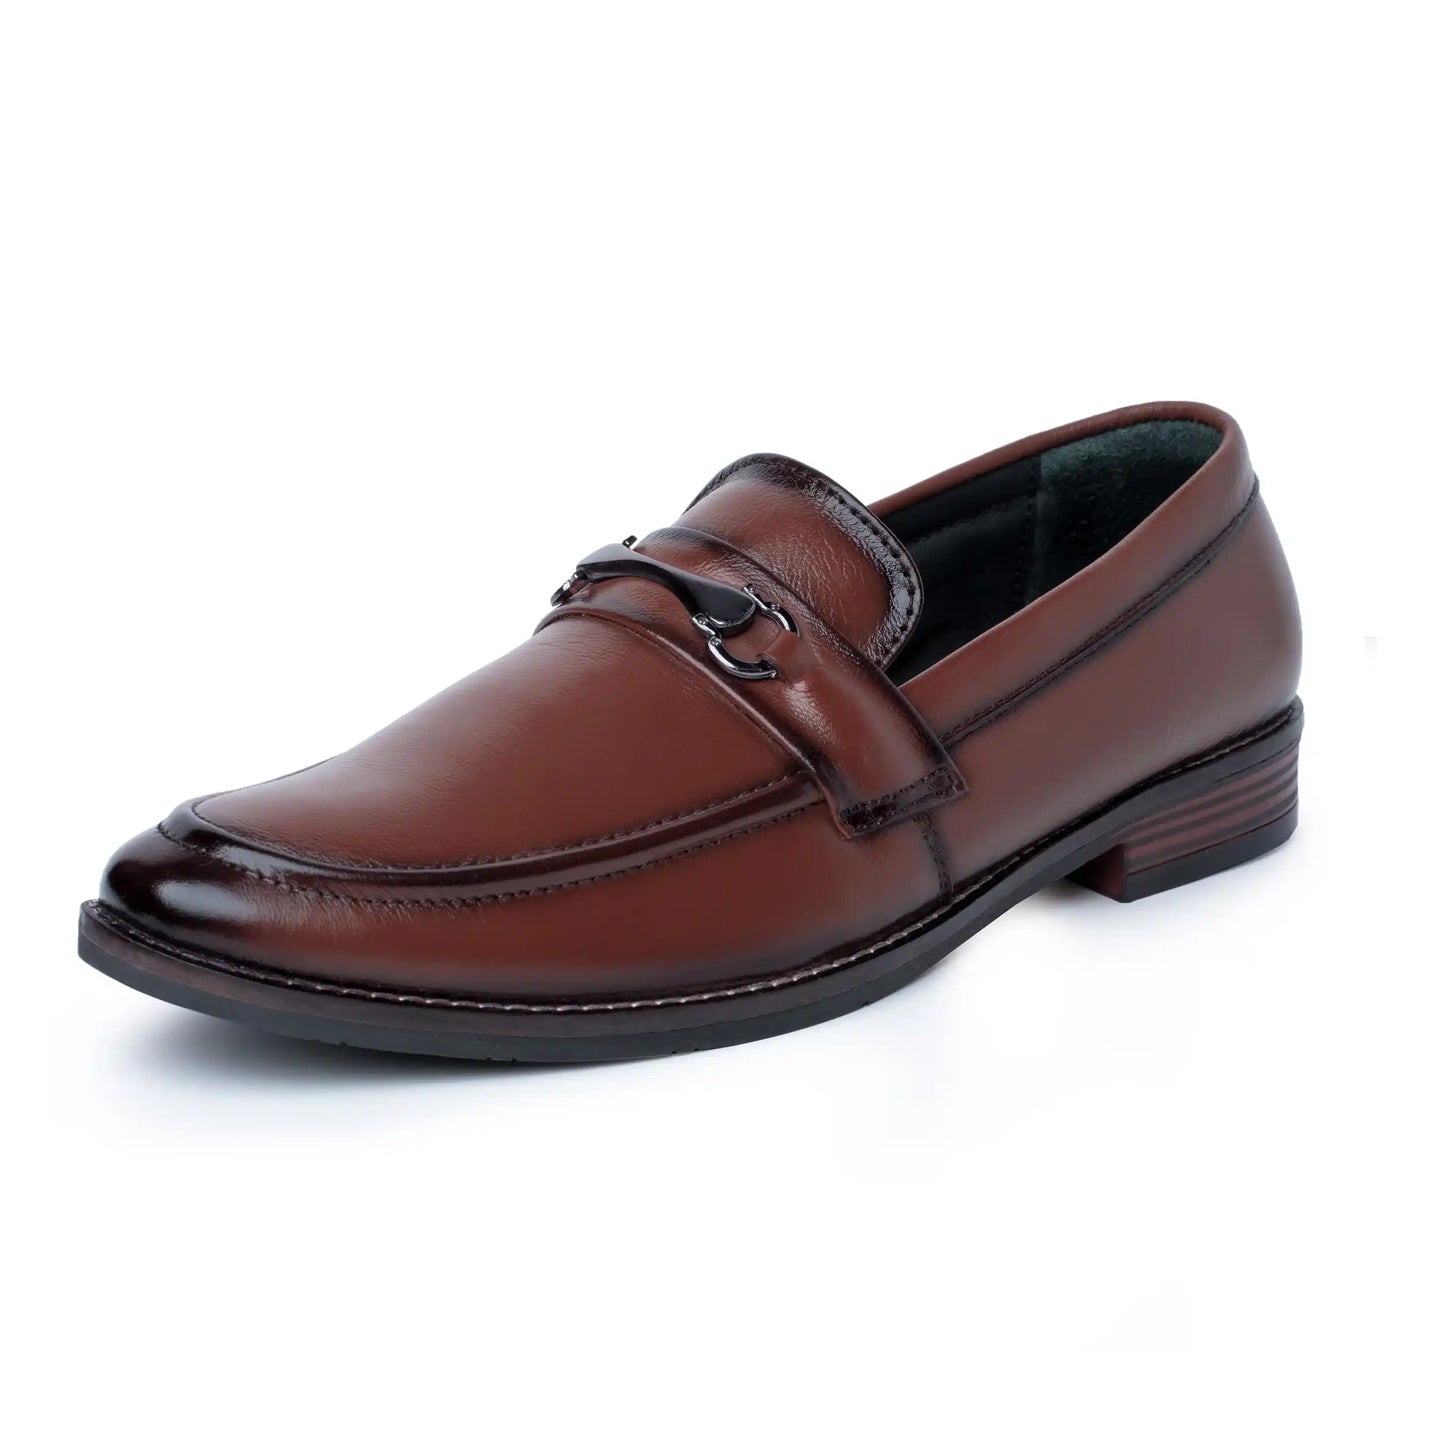 Loafer for Men Pure Leather Causal Shoes